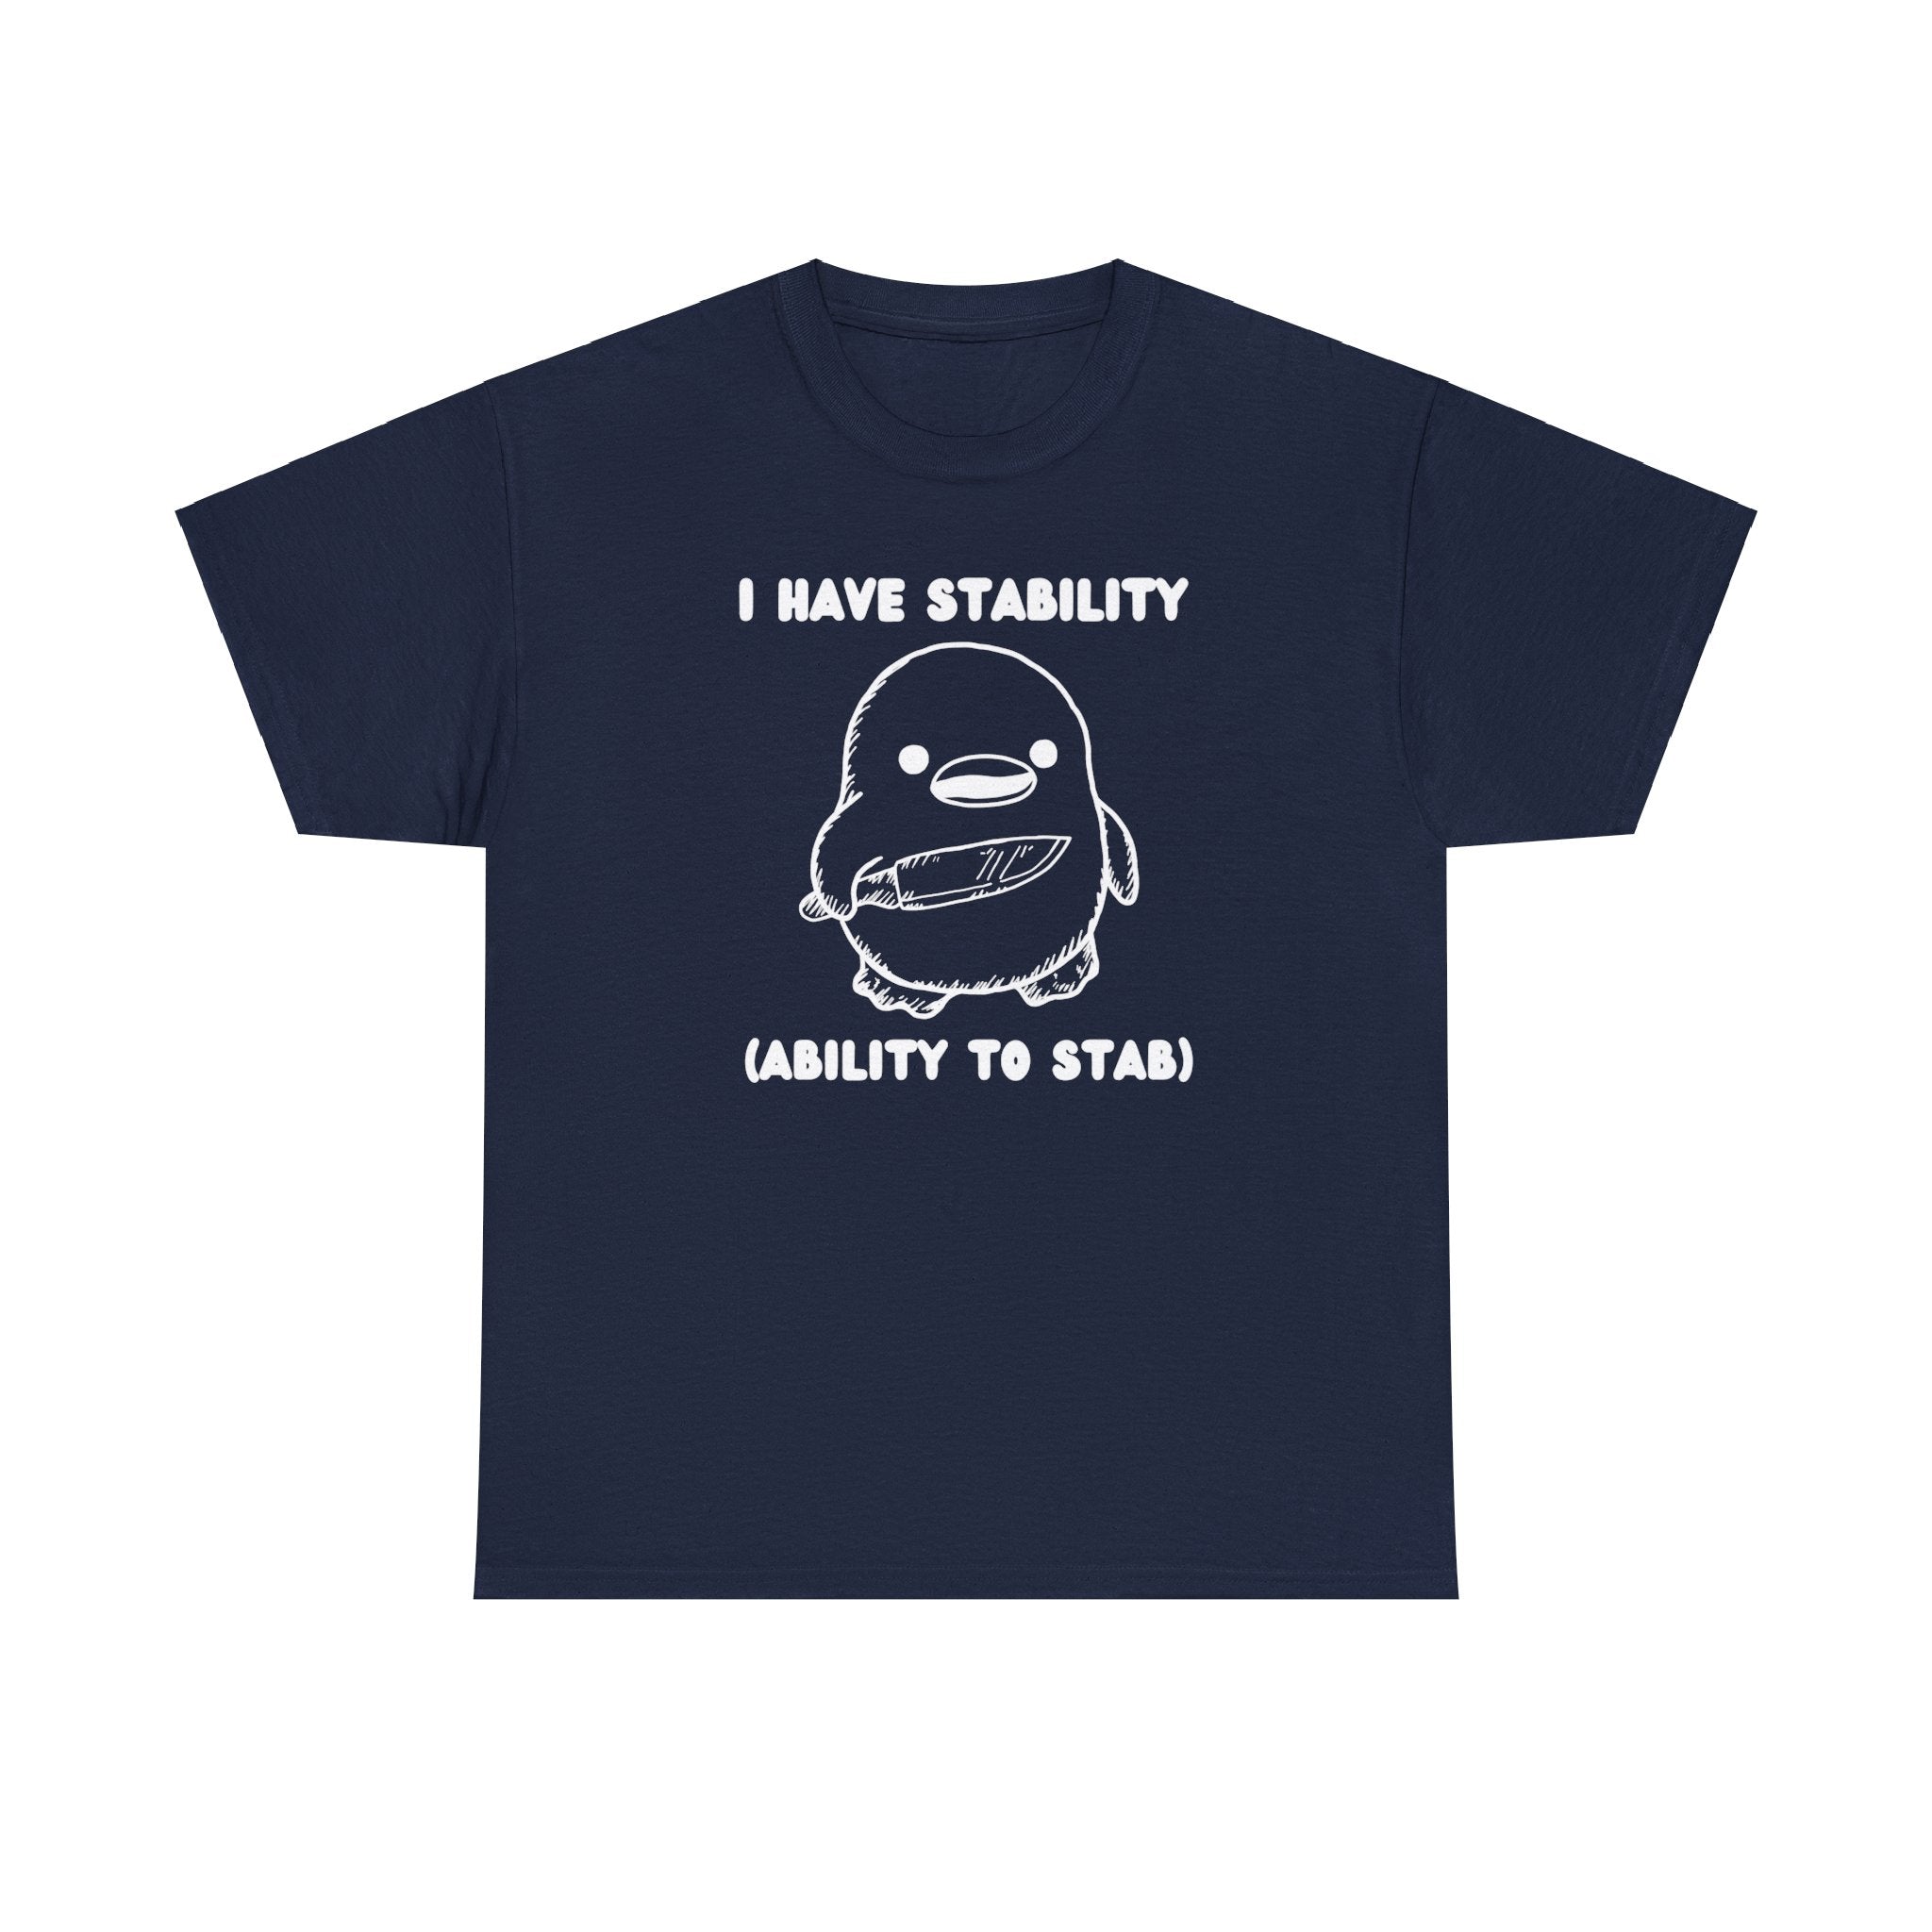 I have stability (ability to stab) shirt